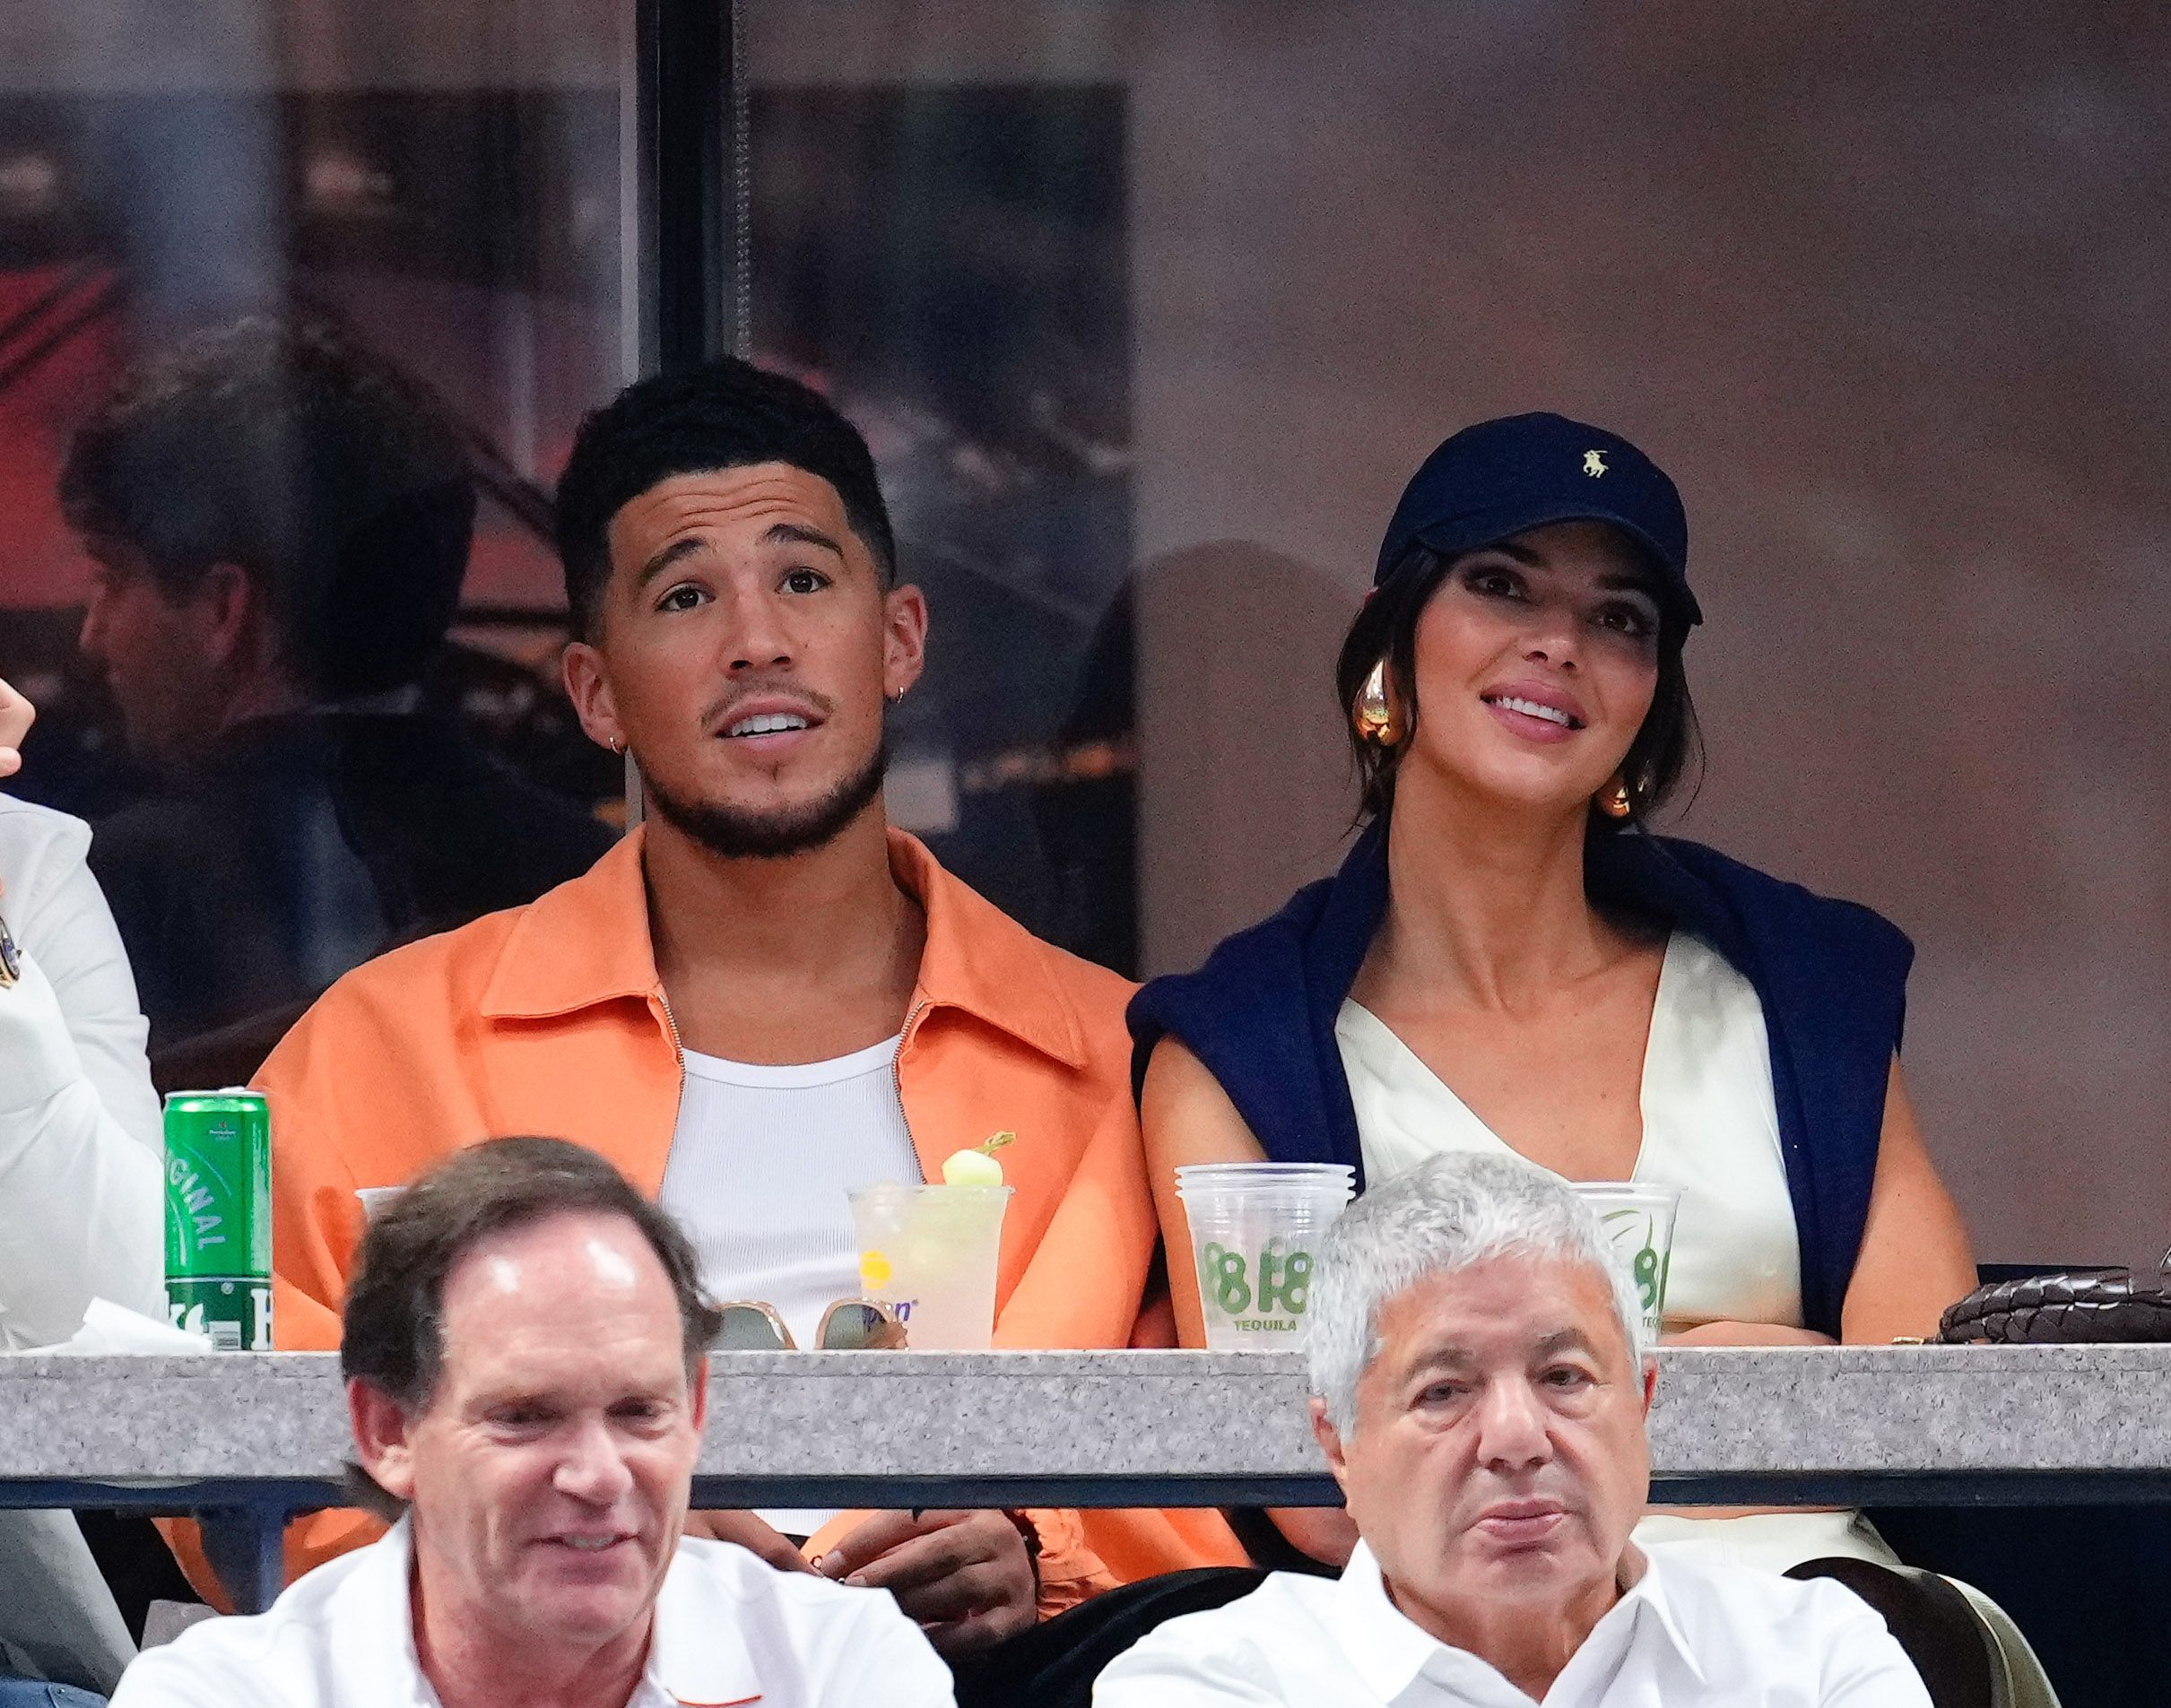 Kendall Jenner, Devin Booker, James Harden and Other Celebrities